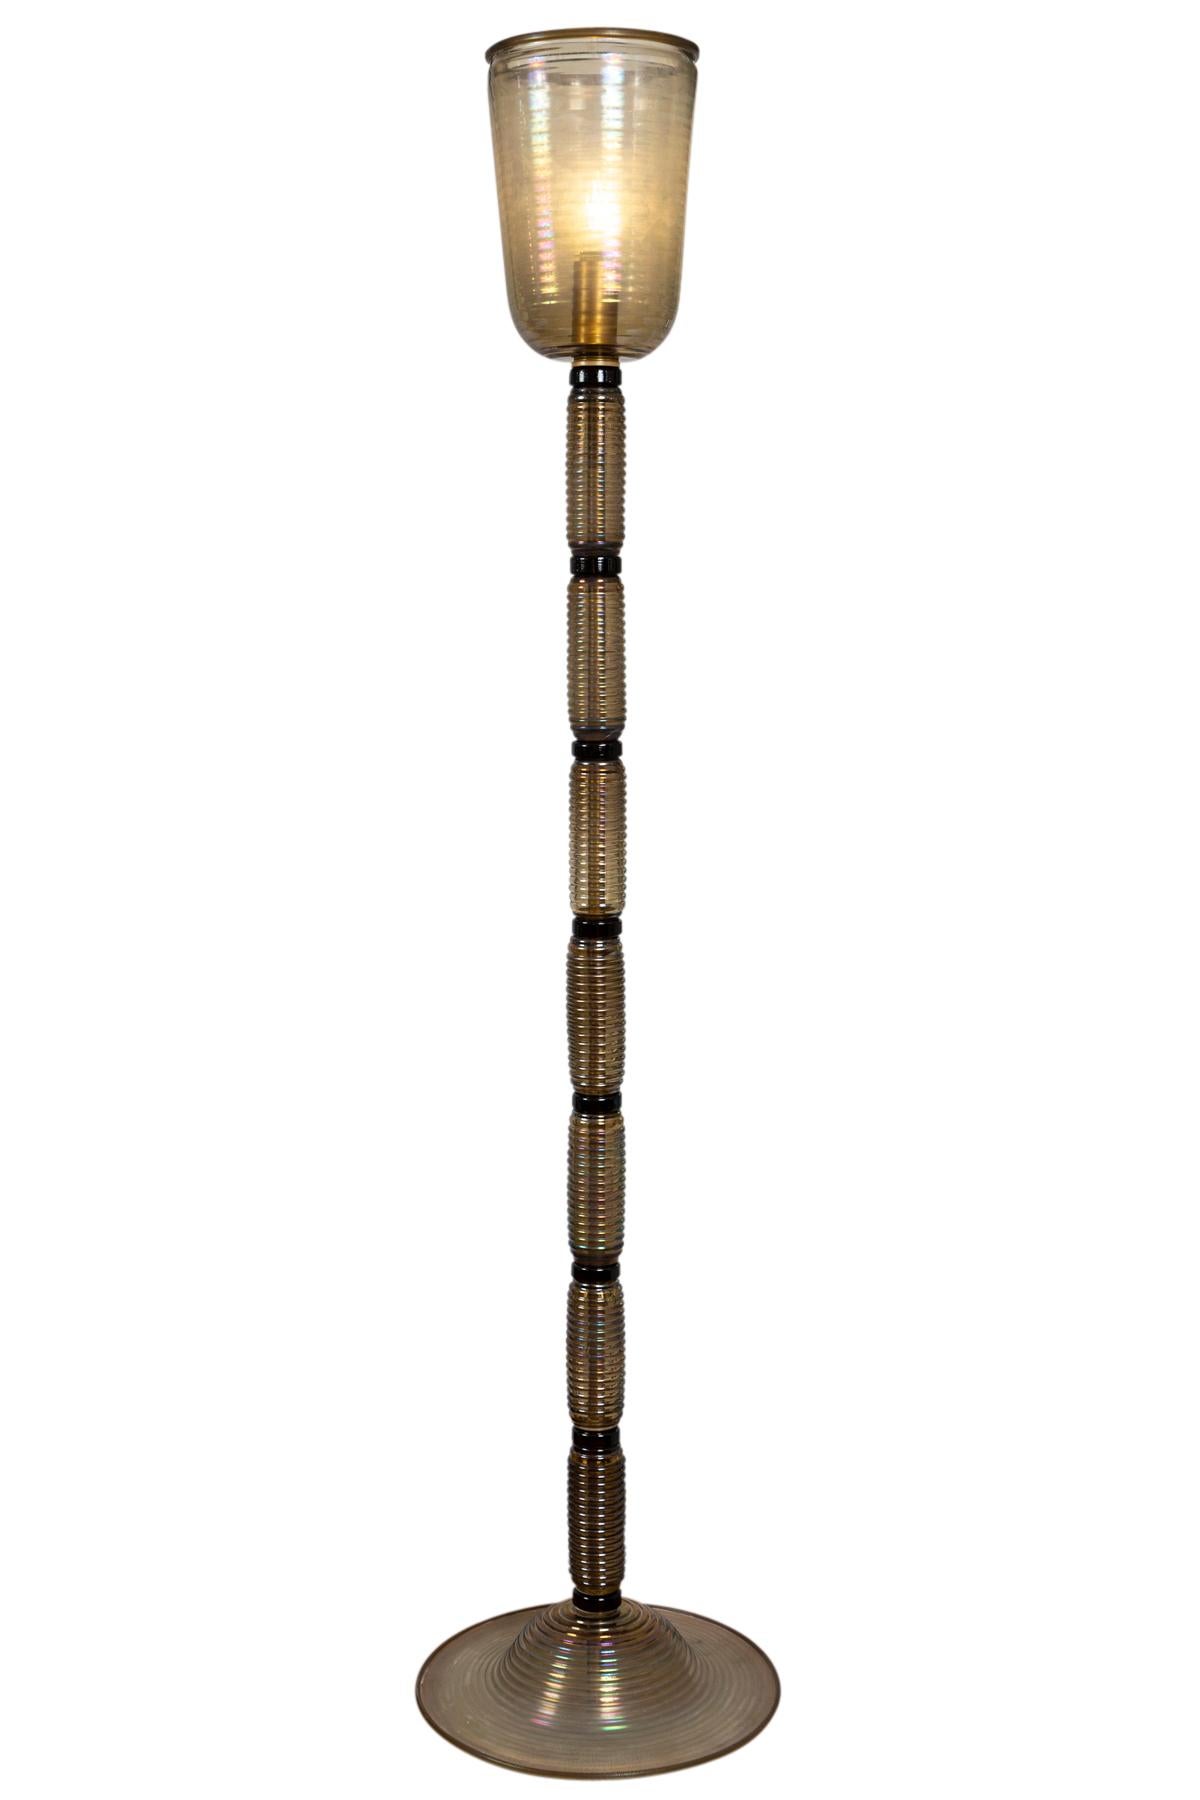 Venini style smoke beige blown glass with irridescence form this minimilistic torchiere floor lamp comprised of 17 glass pieces of glass.

Origin: Murano, Italy
Dating: Contemporary, Artisan Blown Work
Dimensions: 77? high, 17? diameter.